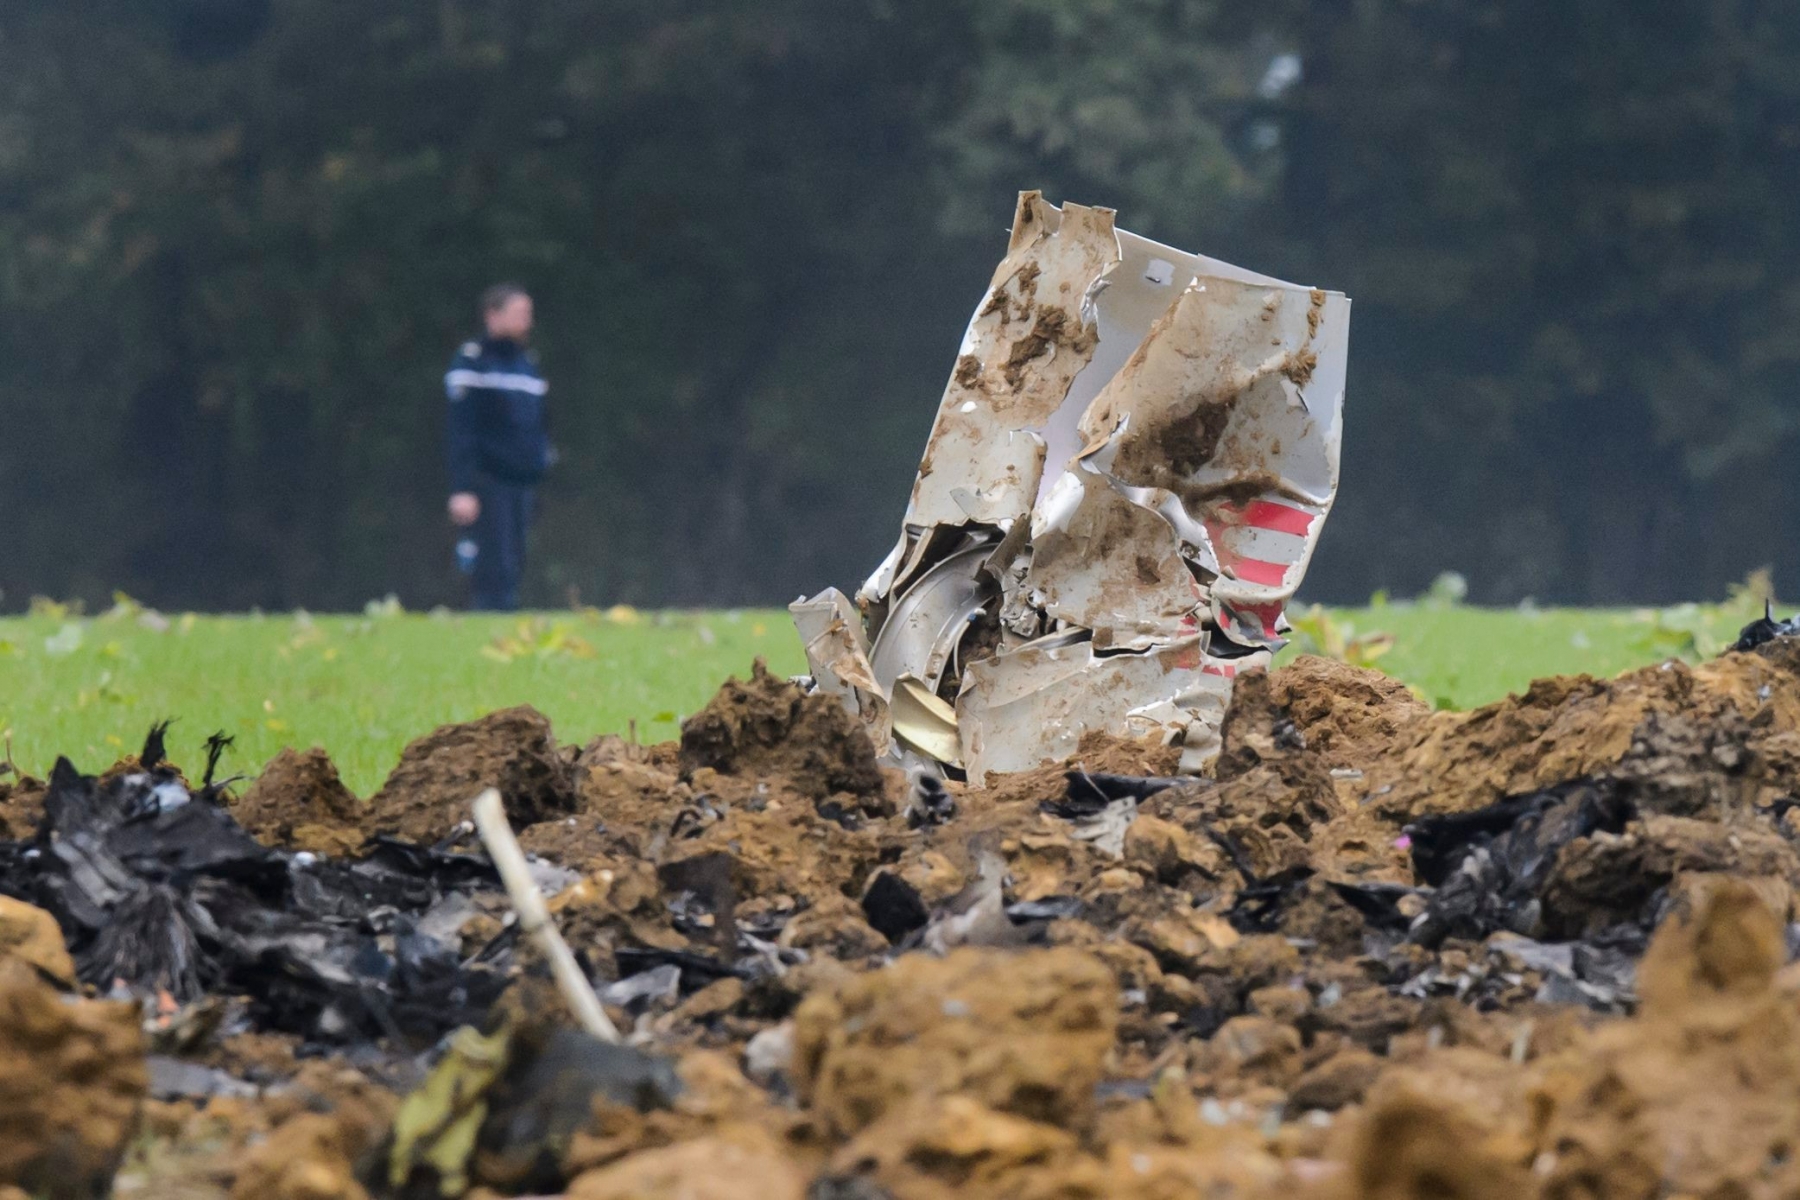 A French Gendarmerie officer walks next to the crash scene with pieces of a wreckage of a Swiss Army F/A-18 jet, in Glamondans, near Besancon, in France, Wednesday, 14 October 2015. An F/A-18 jet fighter belonging to the Swiss Air Force crashed on Wednesday morning during a training exercise in eastern France. The one-seater aircraft crashed into an uninhabited area. The pilot, who ejected to safety, has been injured. (KEYSTONE/Jean-Christophe Bott) FRANCE CRASH F/A-18 JET SWISS ARMY